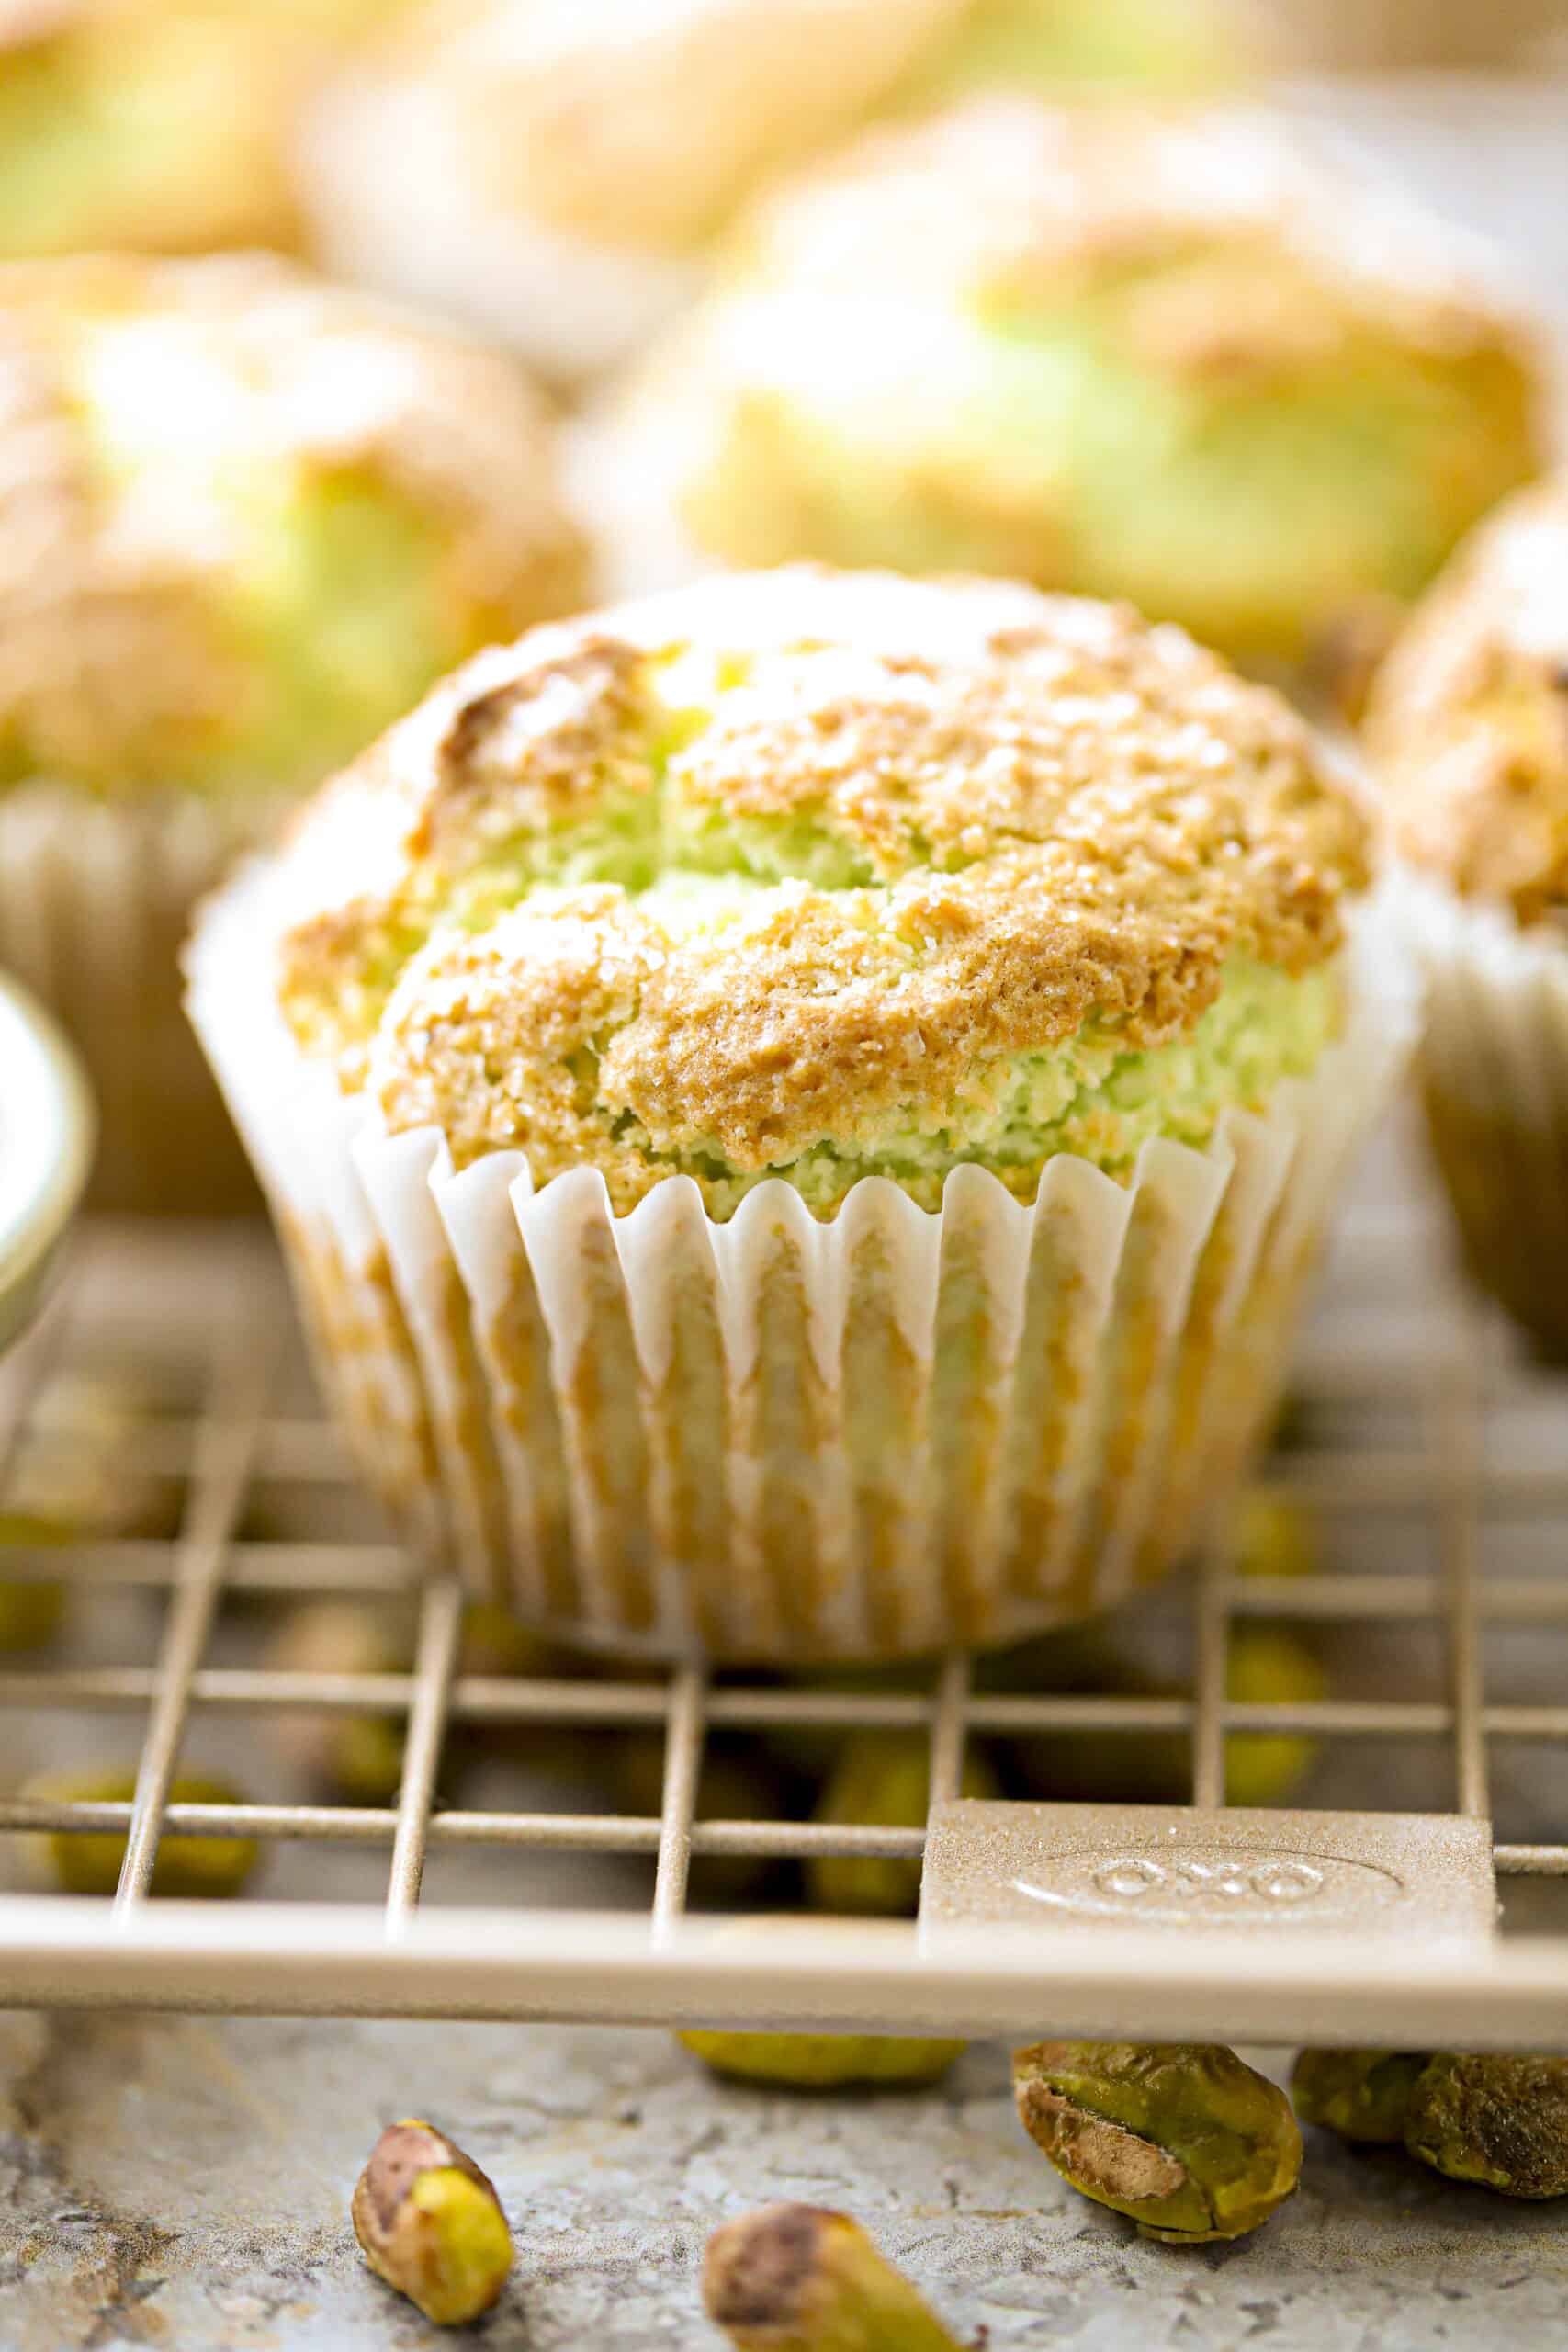 Bakery-Style Pistachio Muffins Recipe with Pudding